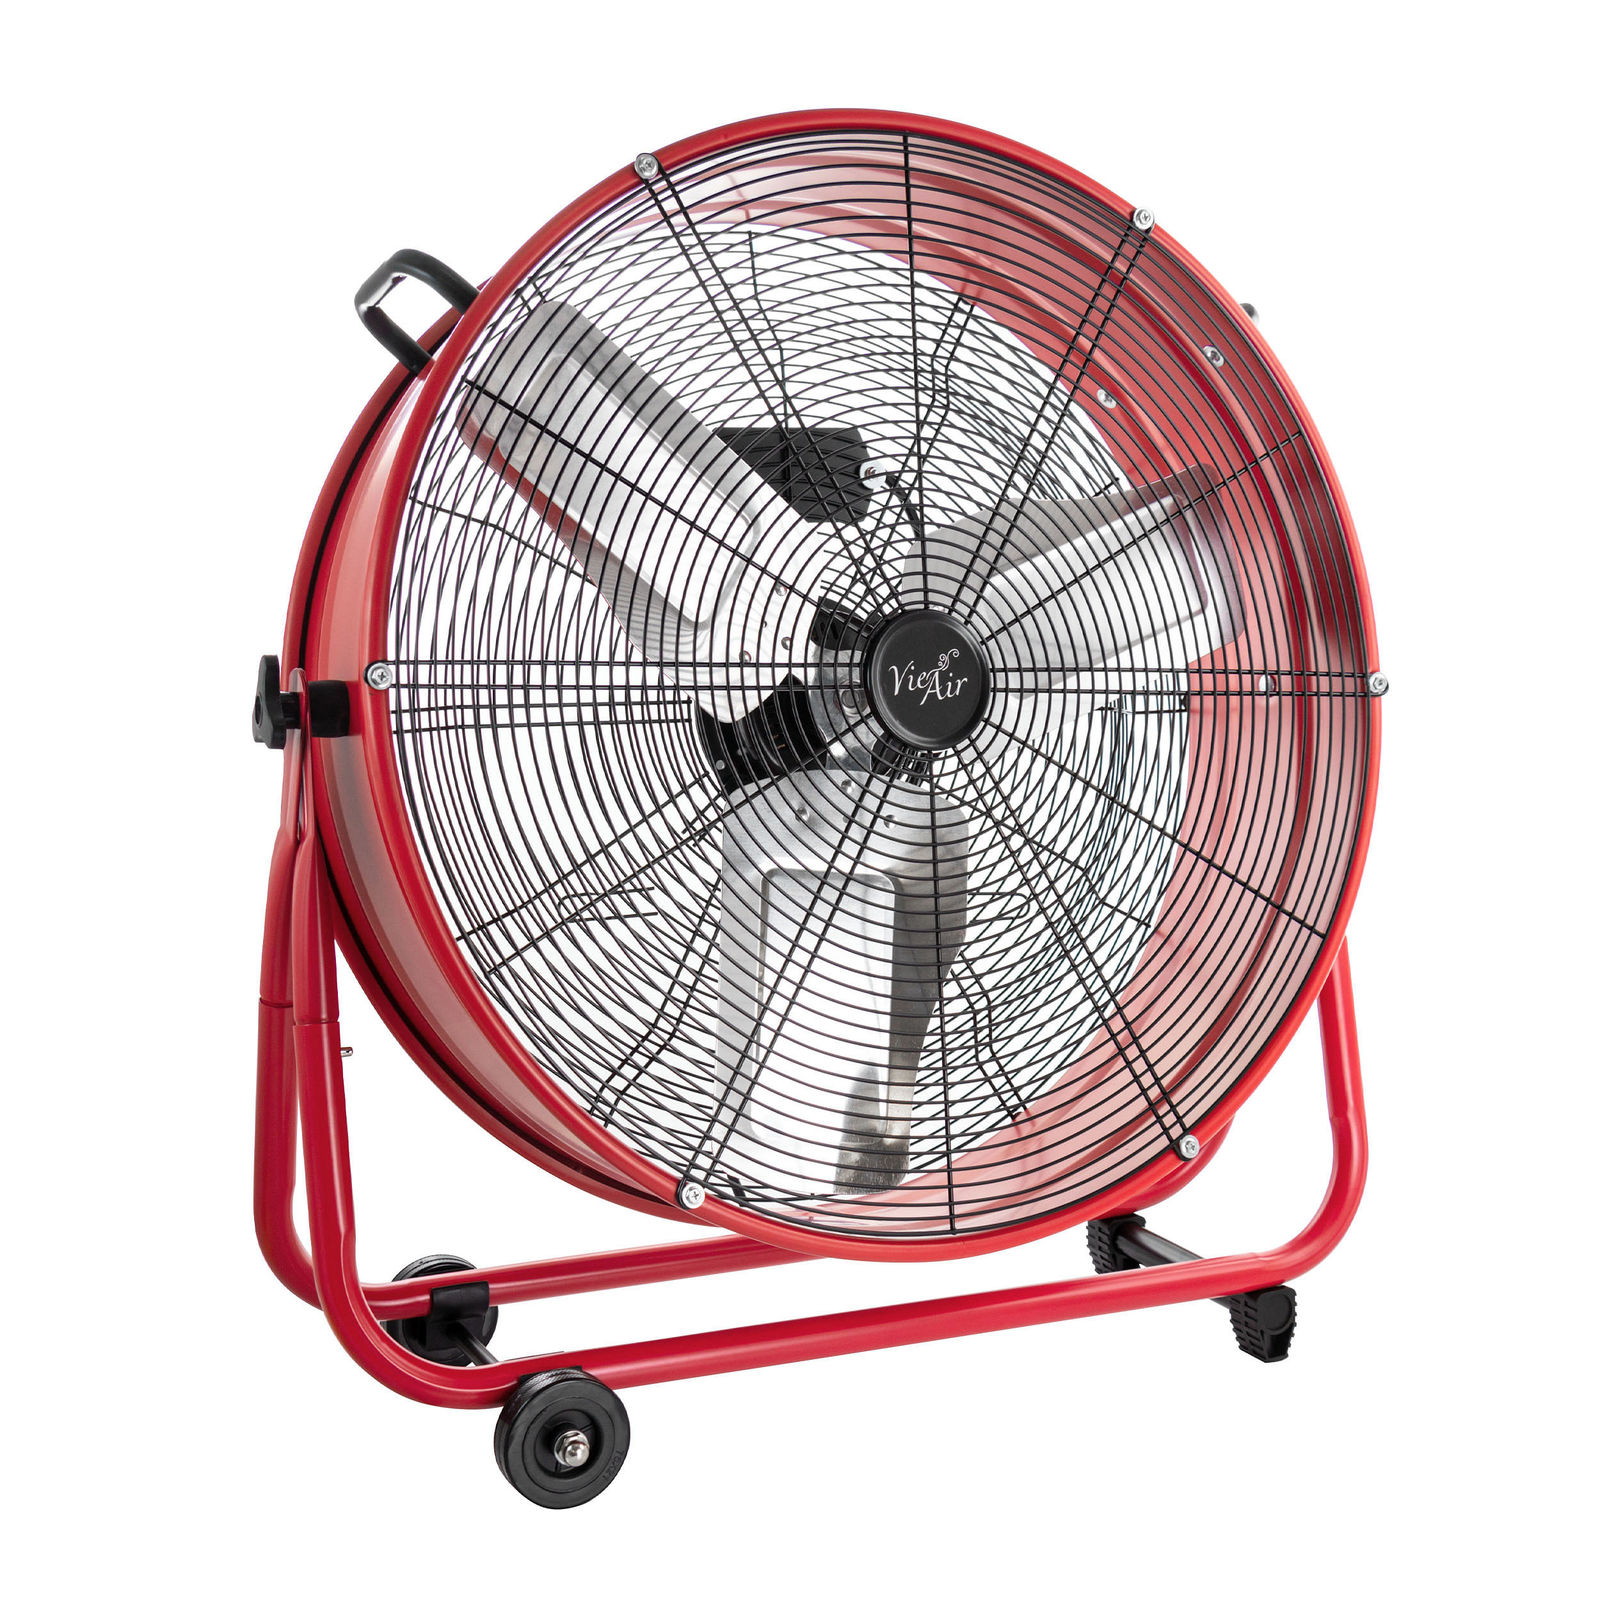 Primary image for Vie Air 24 Inch Commercial Floor Drum Fan in Red